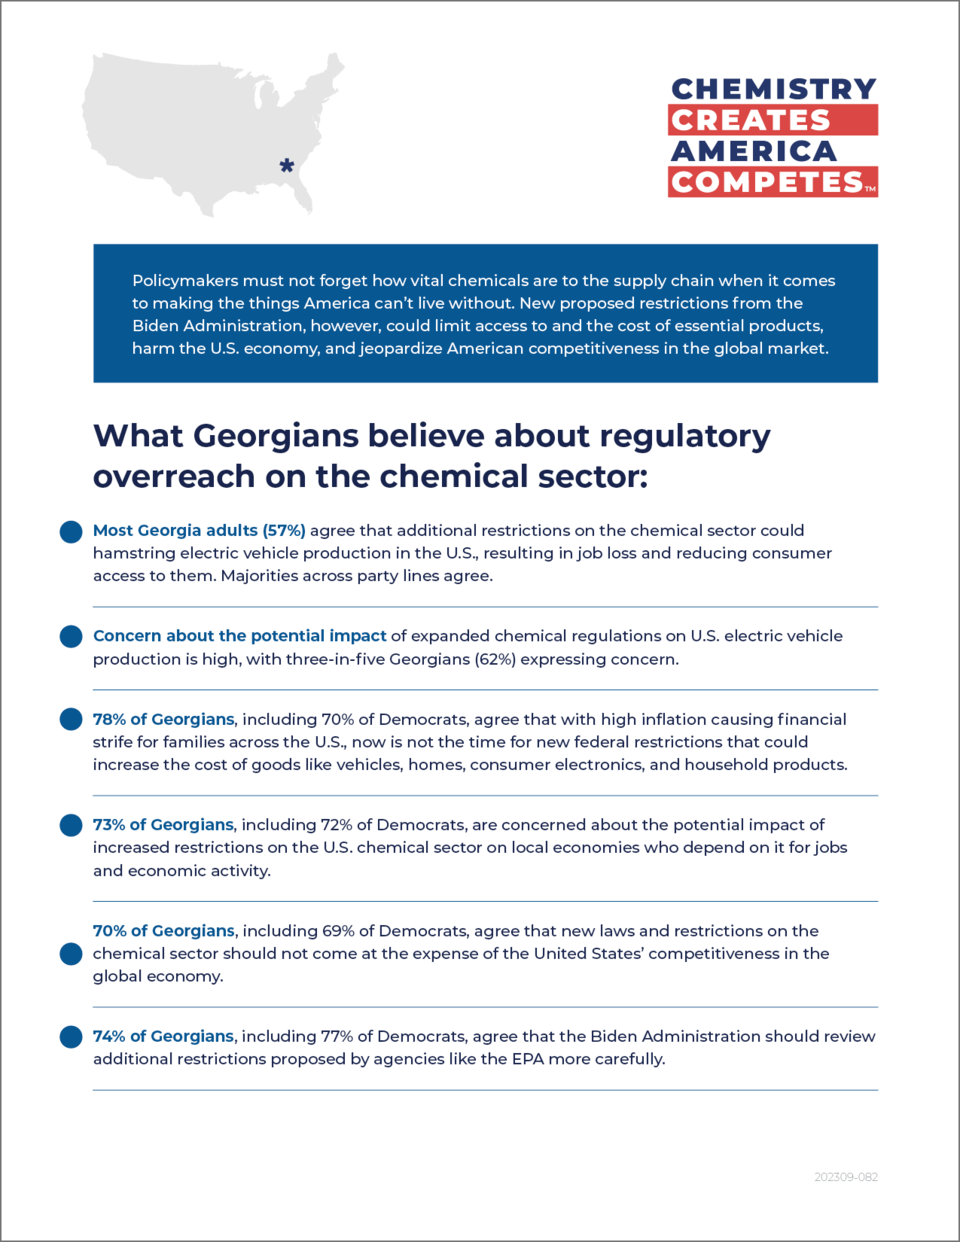 What Georgians Believe About Regulatory Overreach on Chemical Sector - Fact Sheet